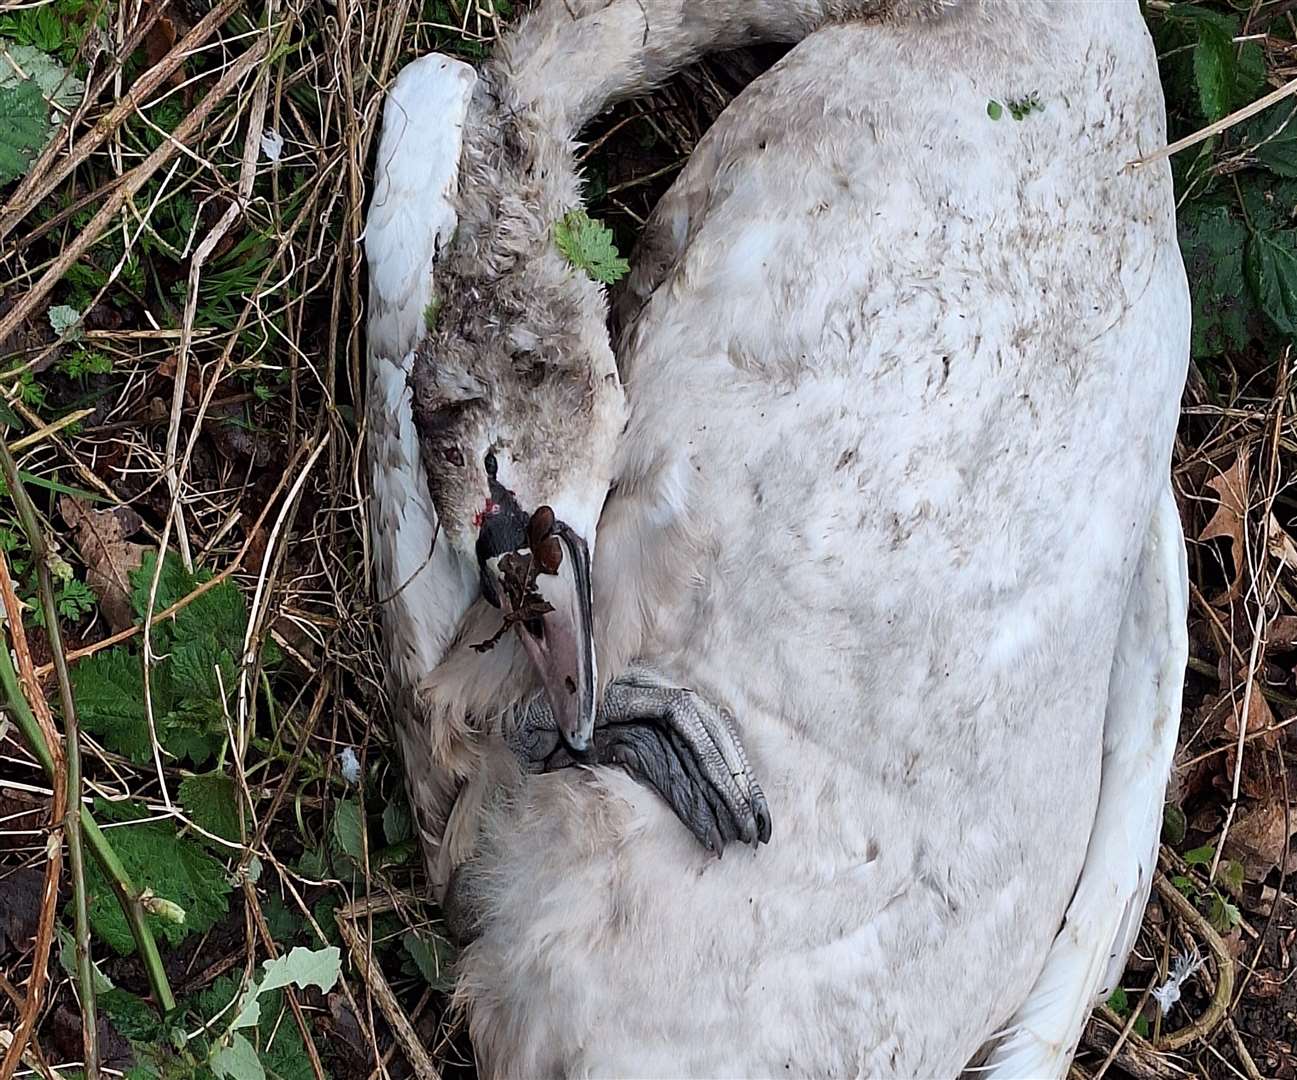 The swan was found with head injuries in brambles along the River Stour in Canterbury. Picture: Leo Slayter